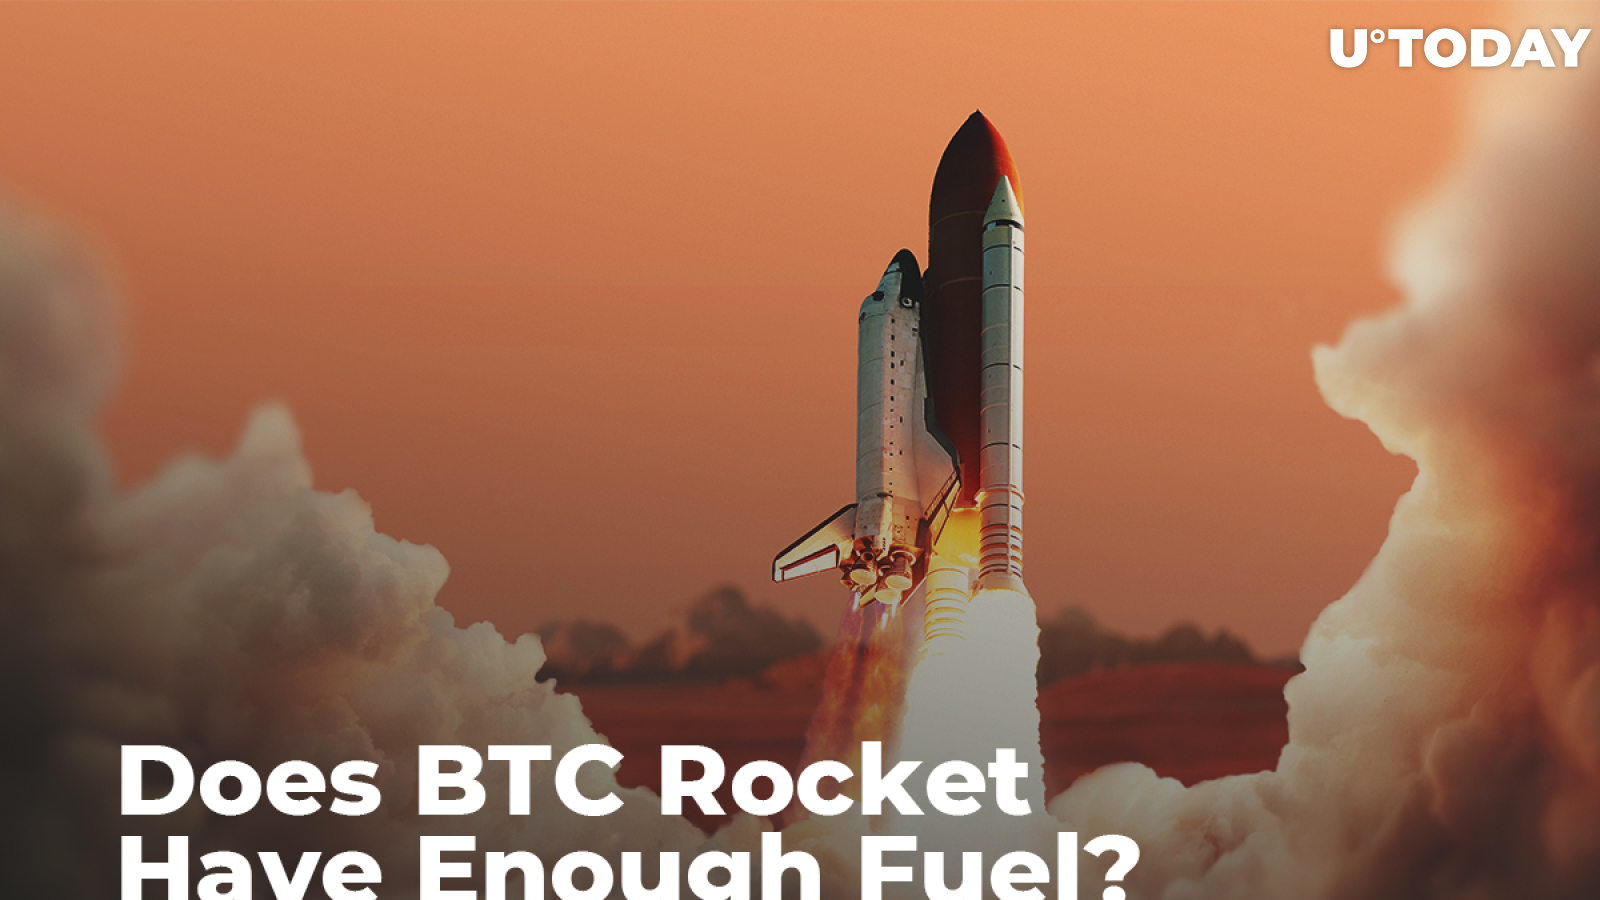 Bitcoin Price $9K Breakout Will Repeat in June. Does BTC Rocket Have Enough Fuel?